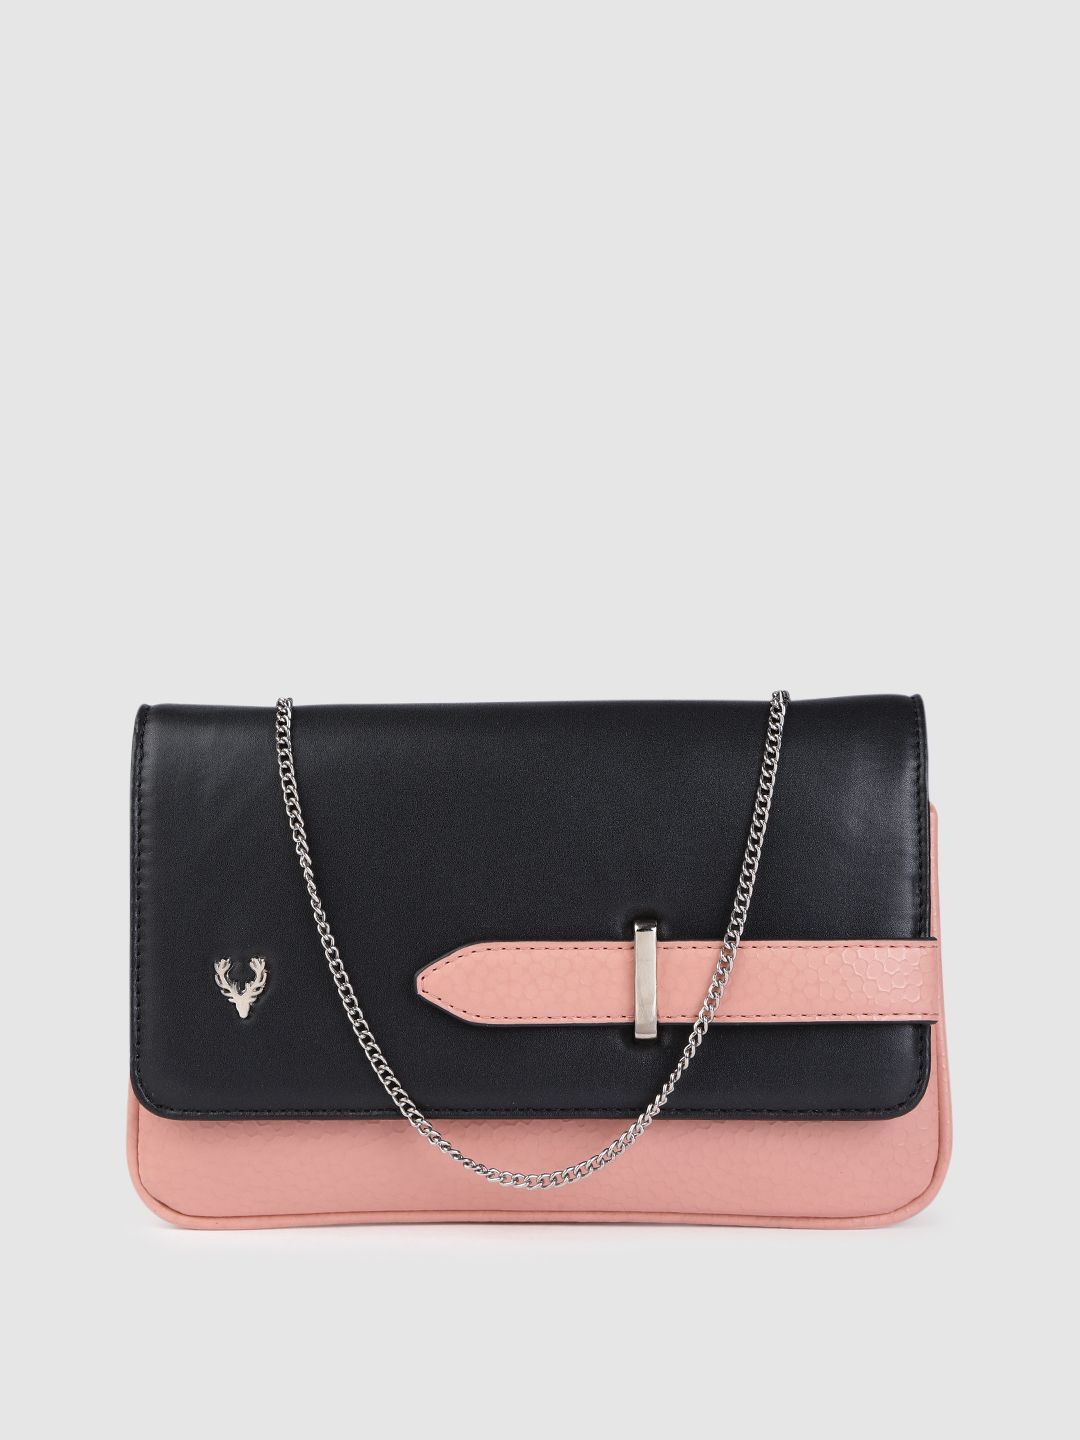 Allen Solly Black & Pink Solid Sling Bag Price in India